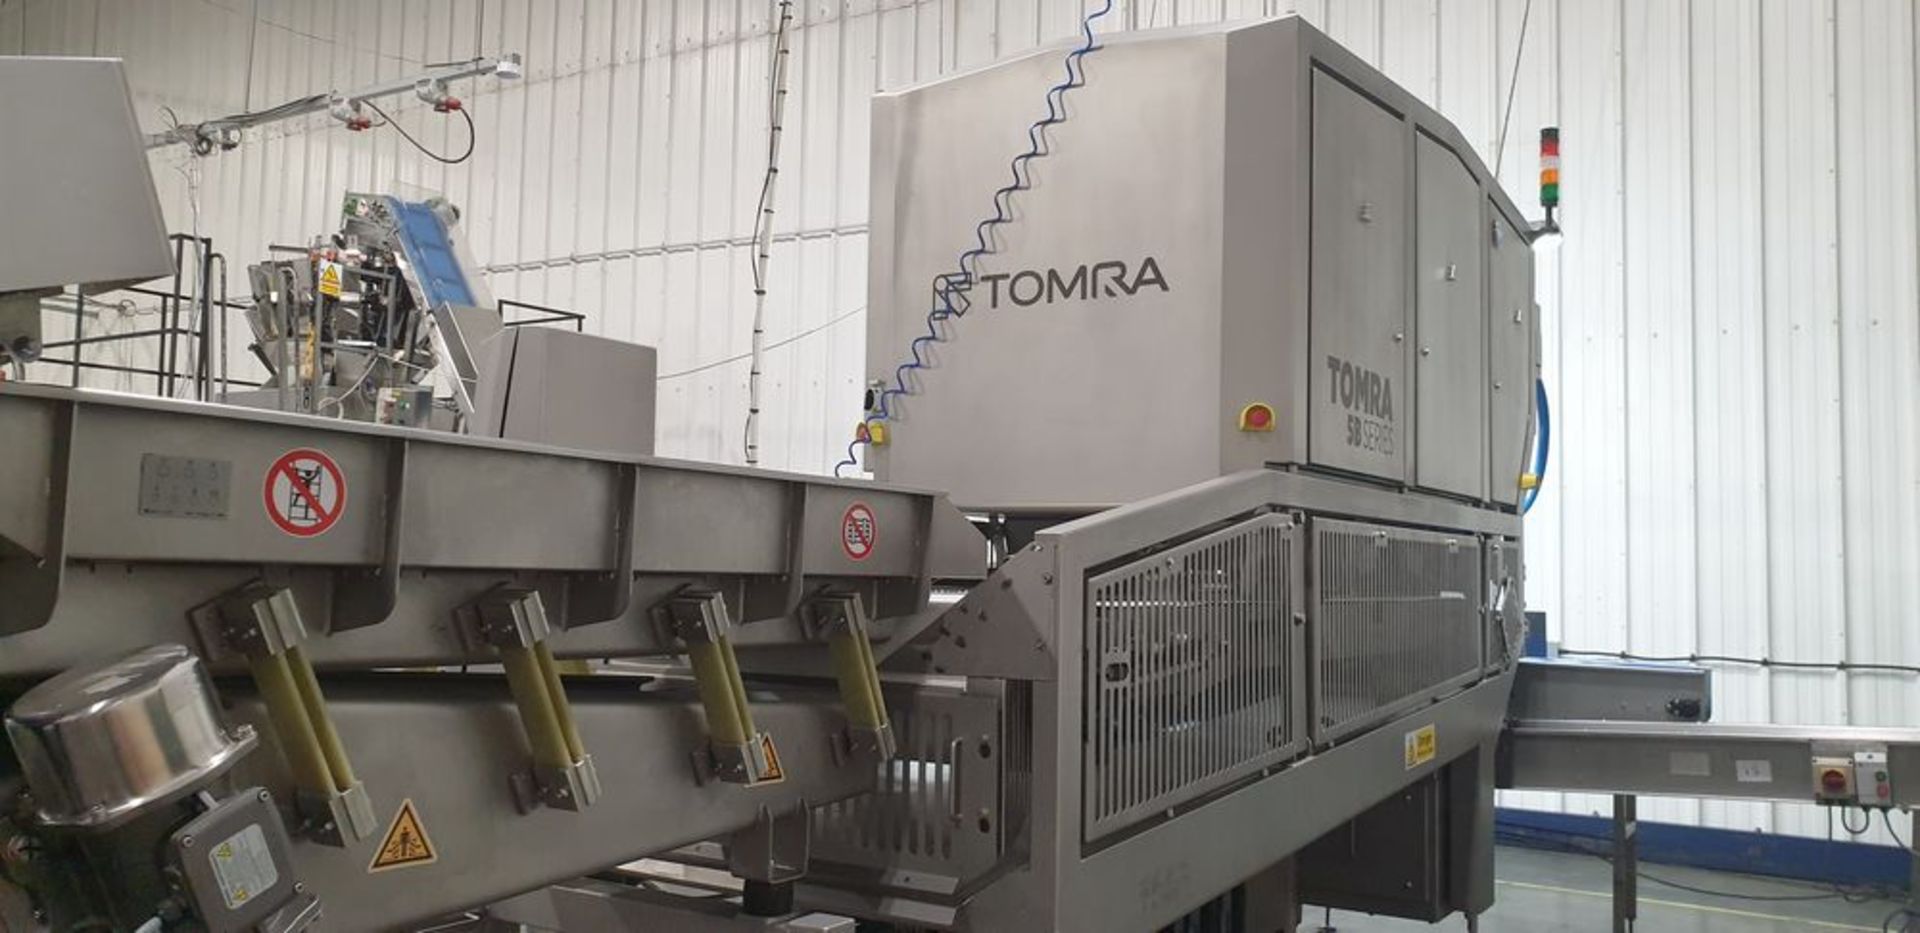 1: Tomra Sorting Solutions 5B Series 800 Sensor Based Sorting Machine complete with touchscreen con